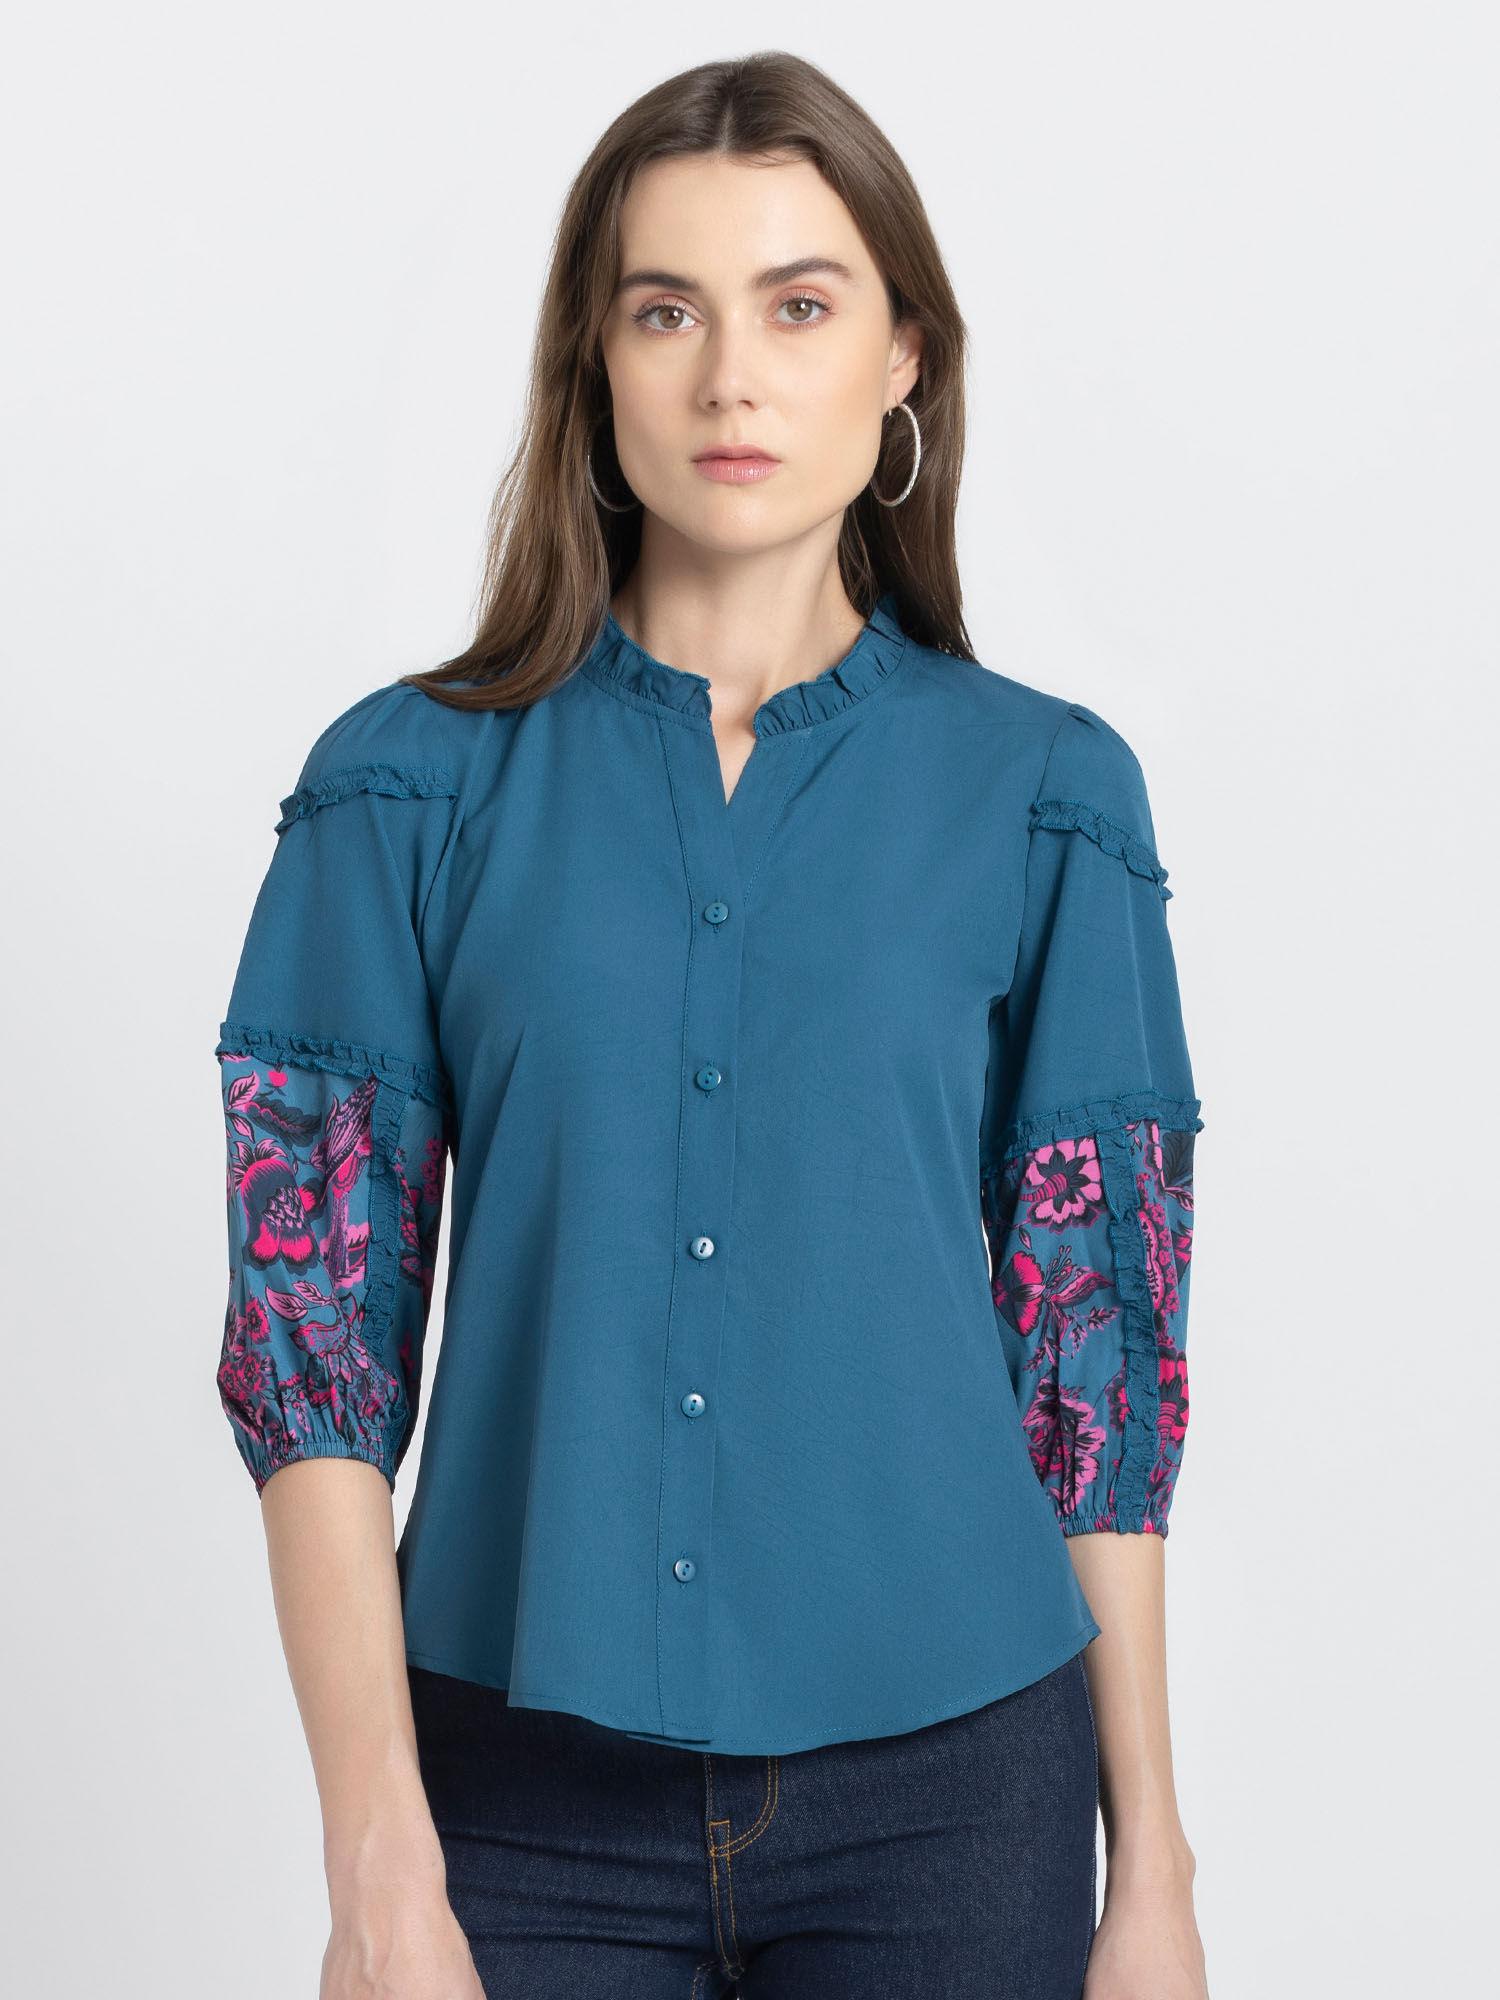 teal floral three fourth sleeves casual shirts for women